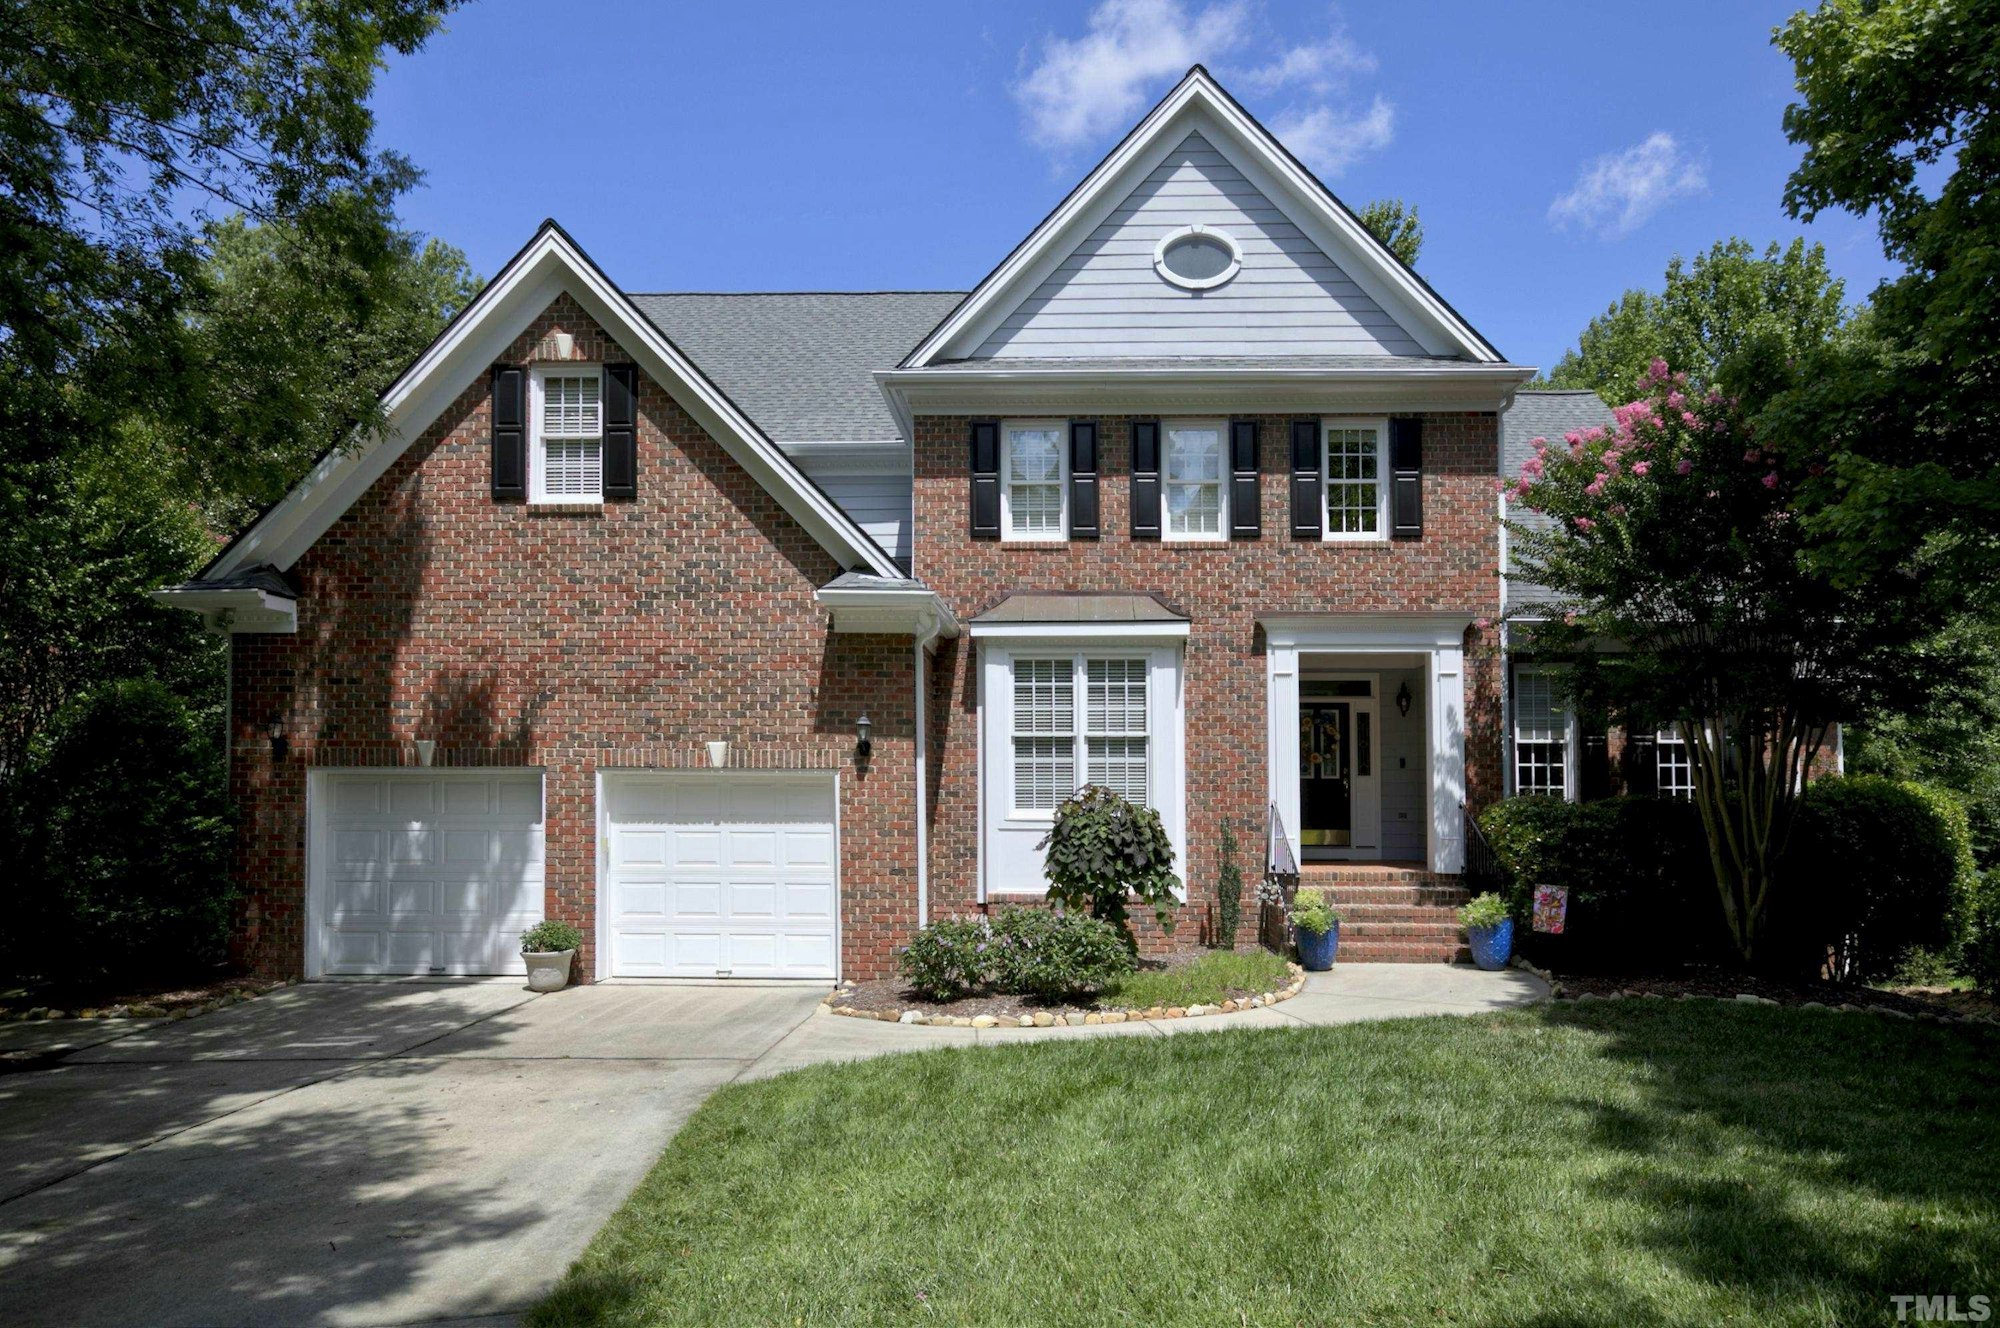 Photo 1 of 43 - 111 Goldenthal Ct, Cary, NC 27519